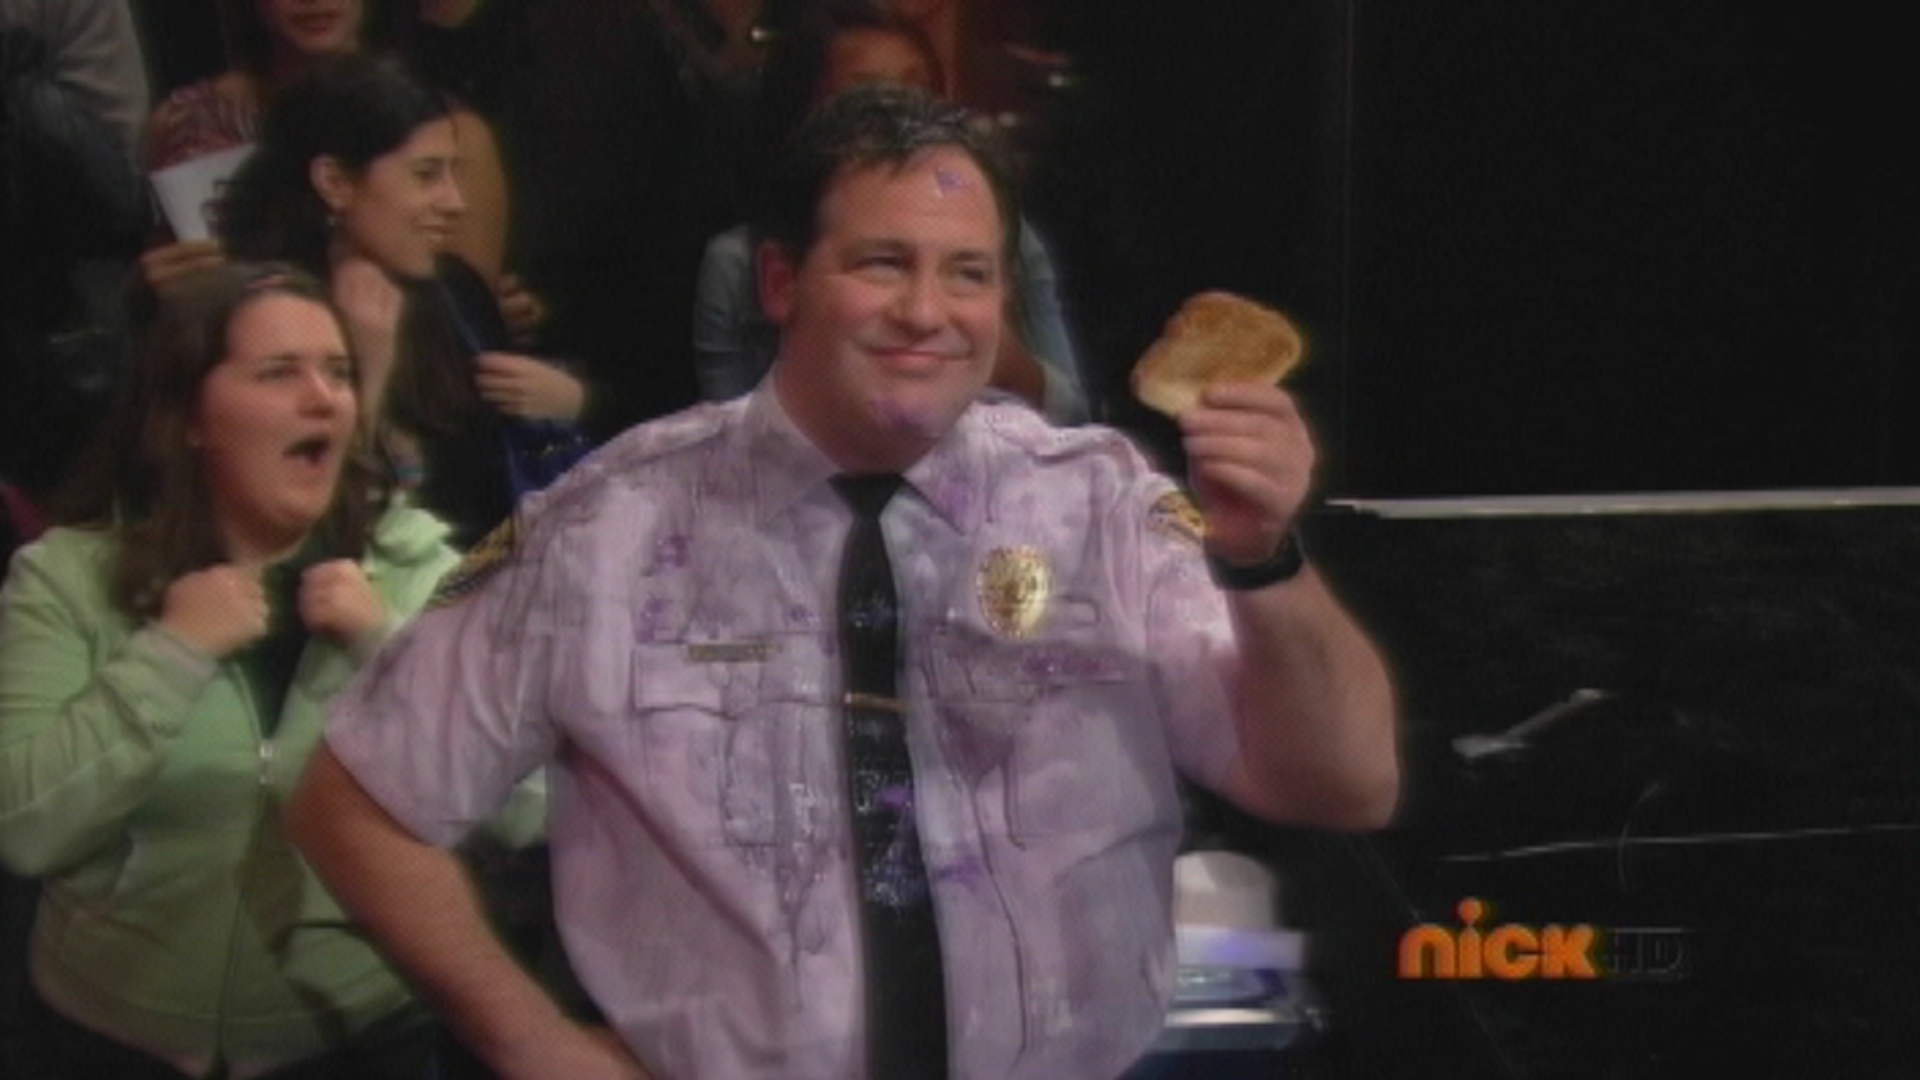 Production still from Marvin Marvin (Nickelodeon). Roger Rignack as the bumbling security guard.